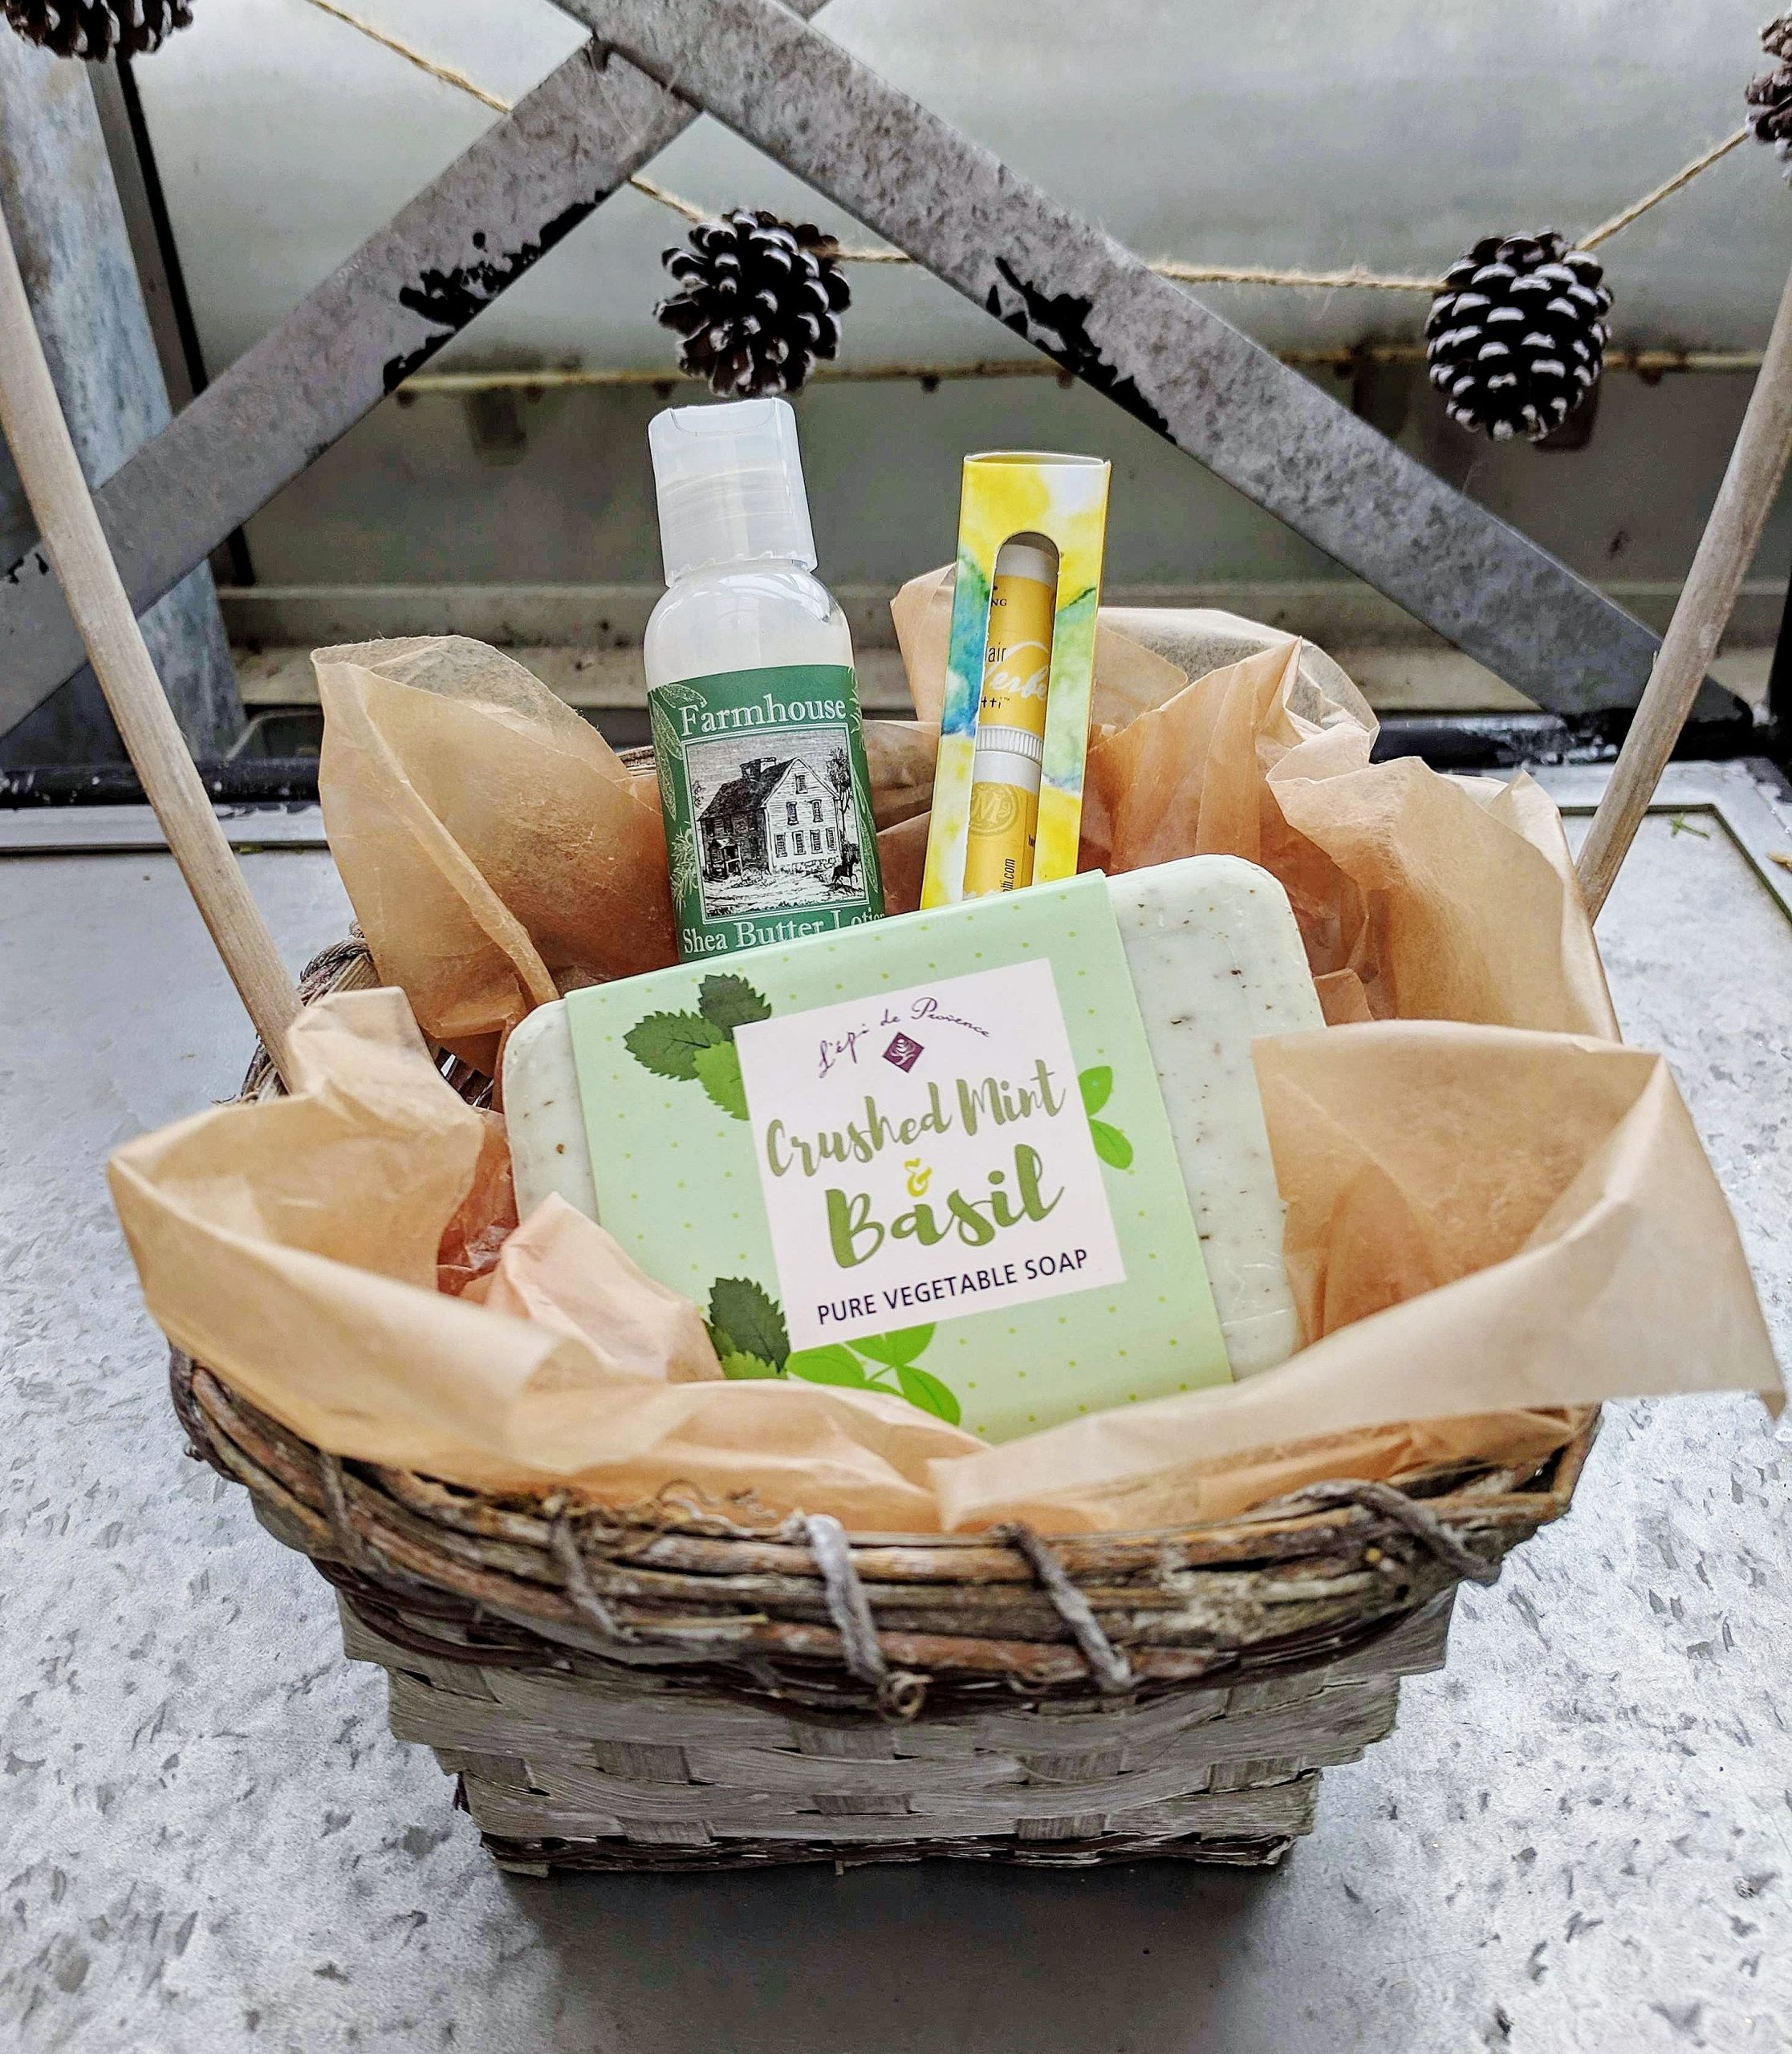 body care items like lotion, soap, lip care in a basket